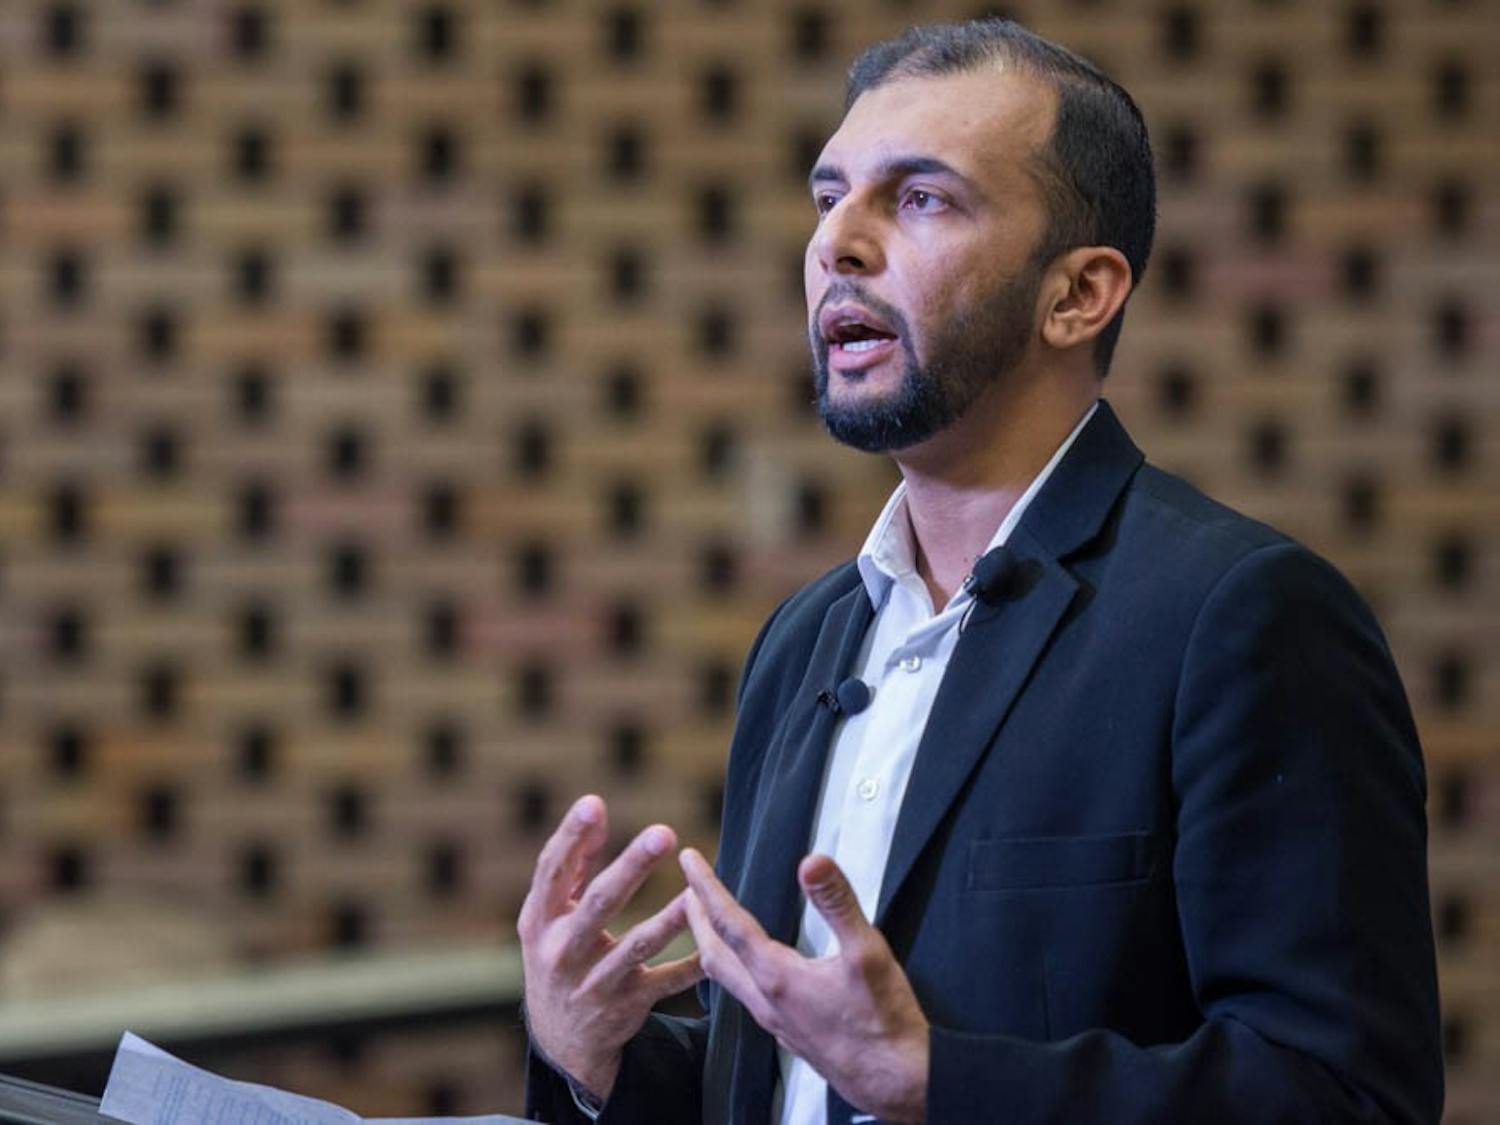 Qasim Rashid, a civil rights attorney, former Harvard University Fellow of Islamic Studies and Amazon bestselling author, spoke at UB Tuesday evening about the misconceptions of Islam.&nbsp;